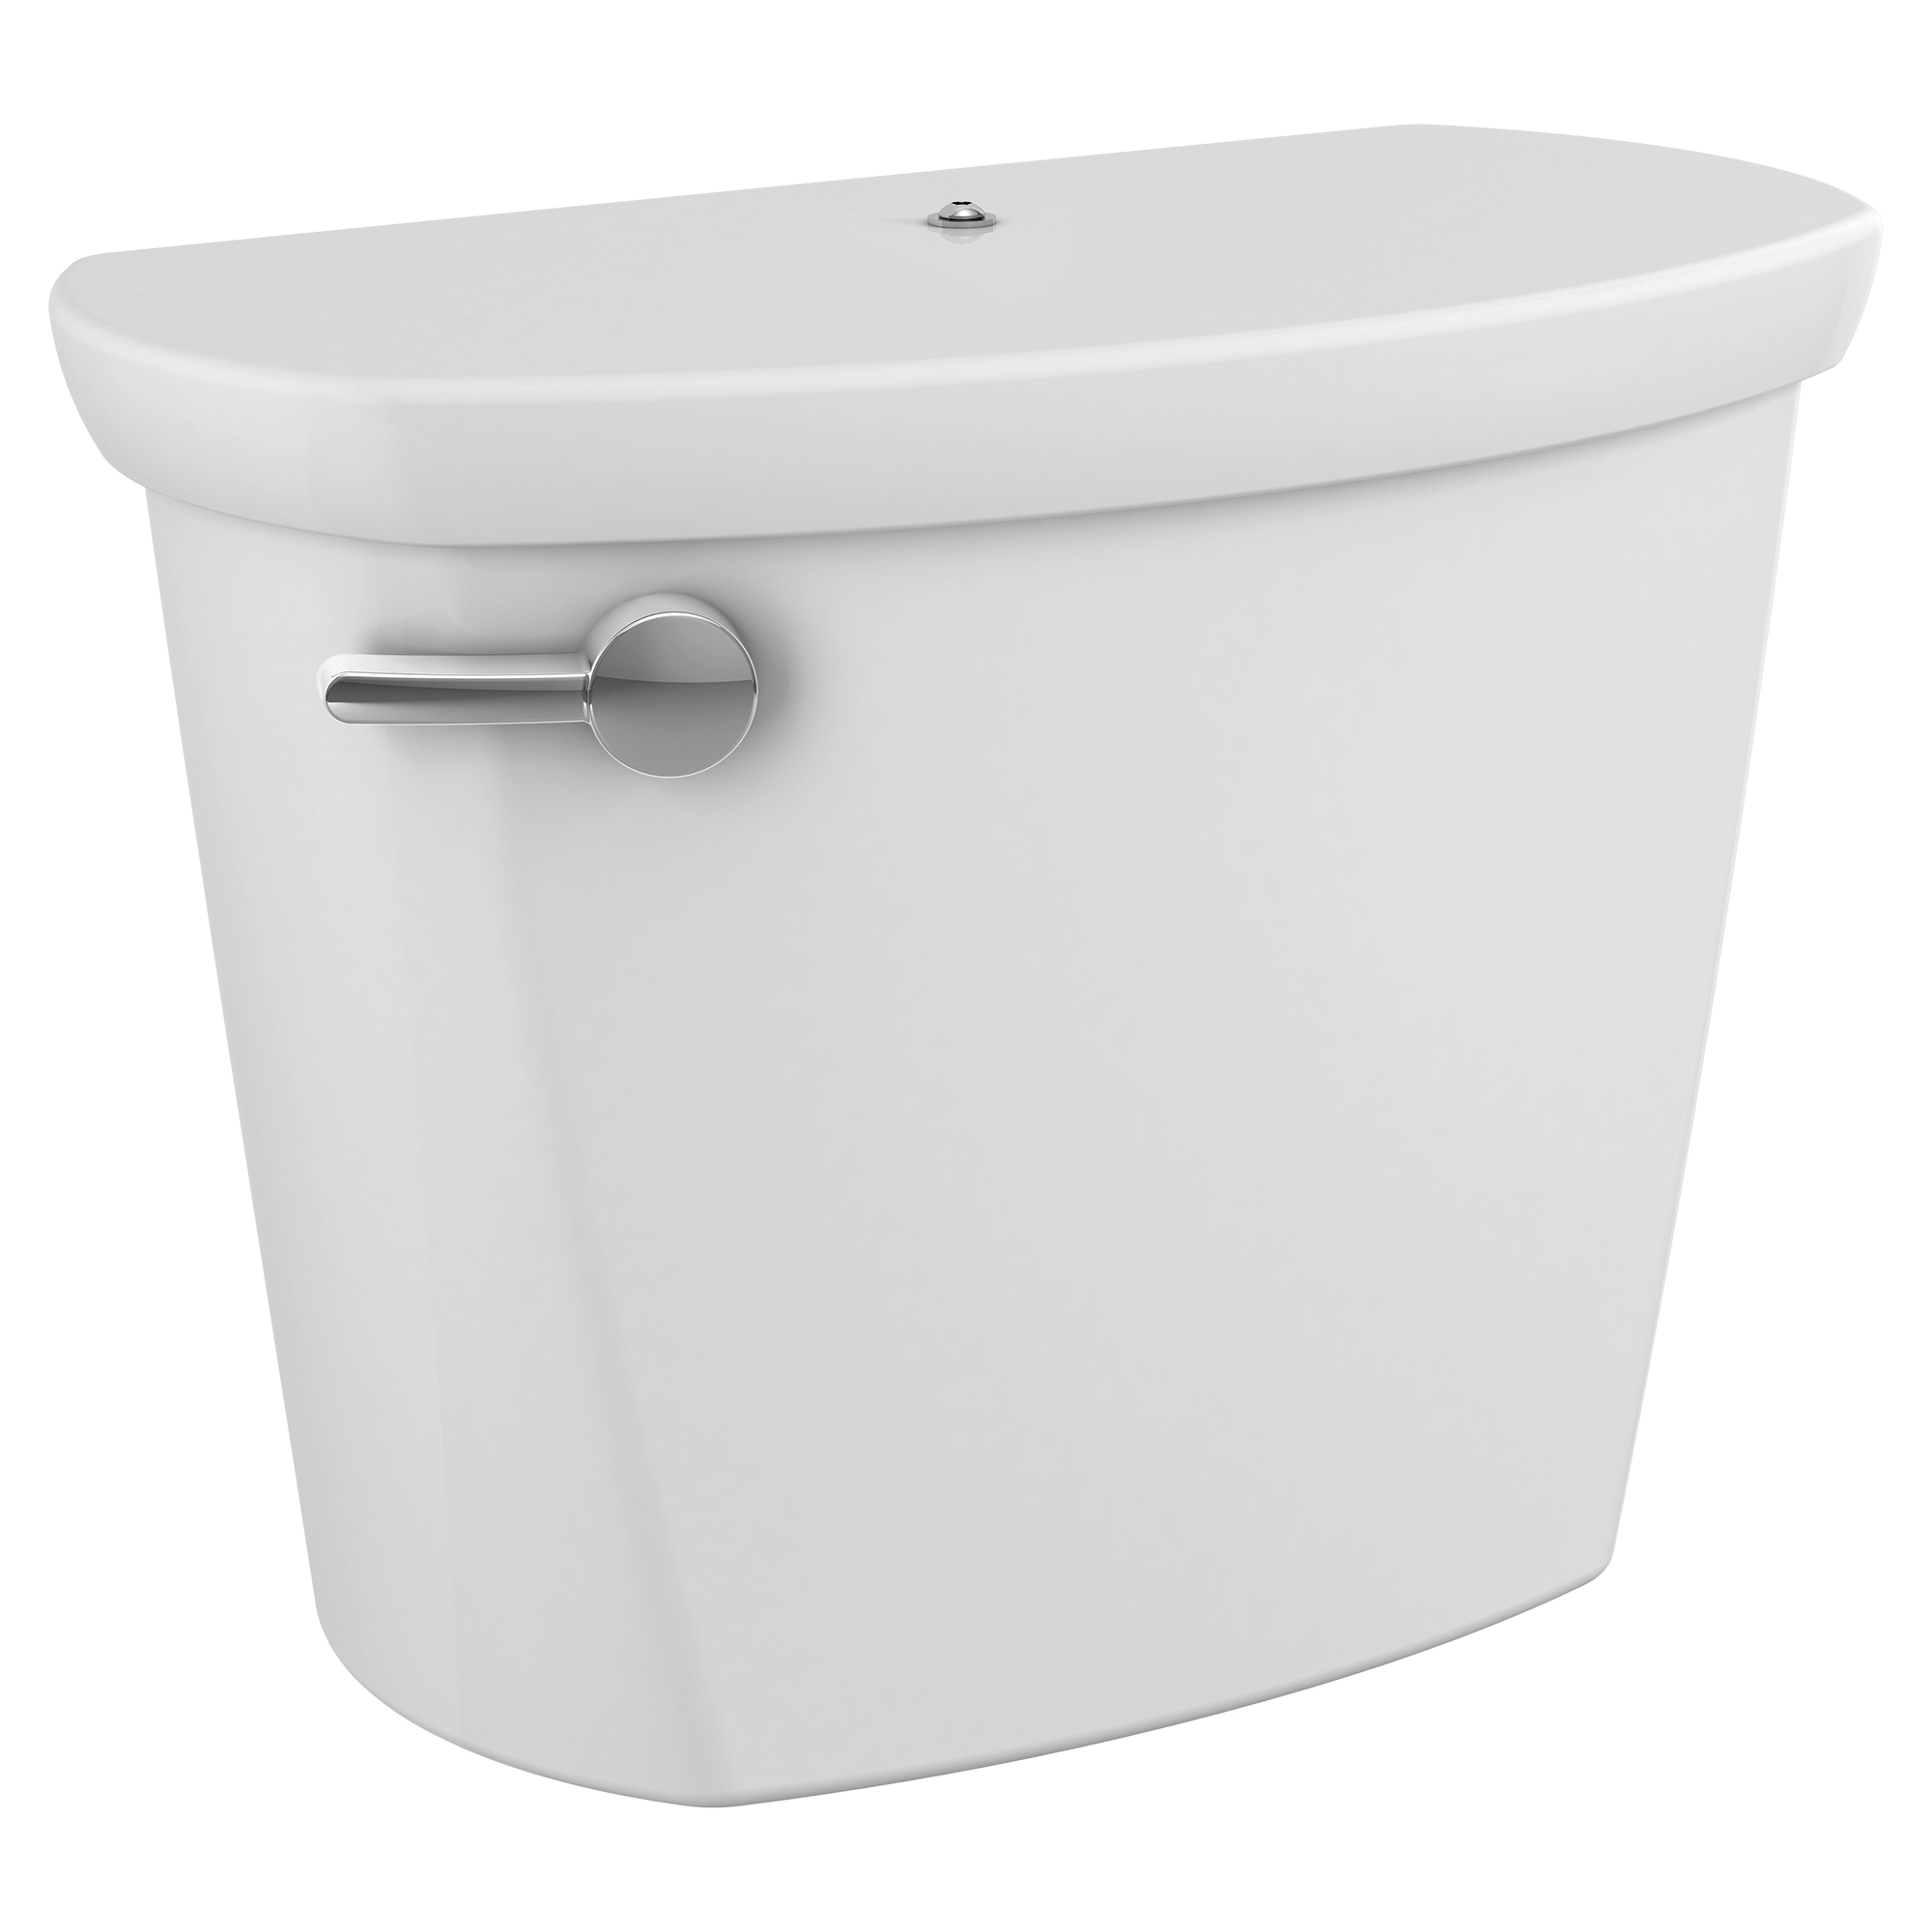 Cadet® PRO 1.28 gpf/4.0 Lpf 14-Inch Toilet Tank with Tank Cover Locking Device